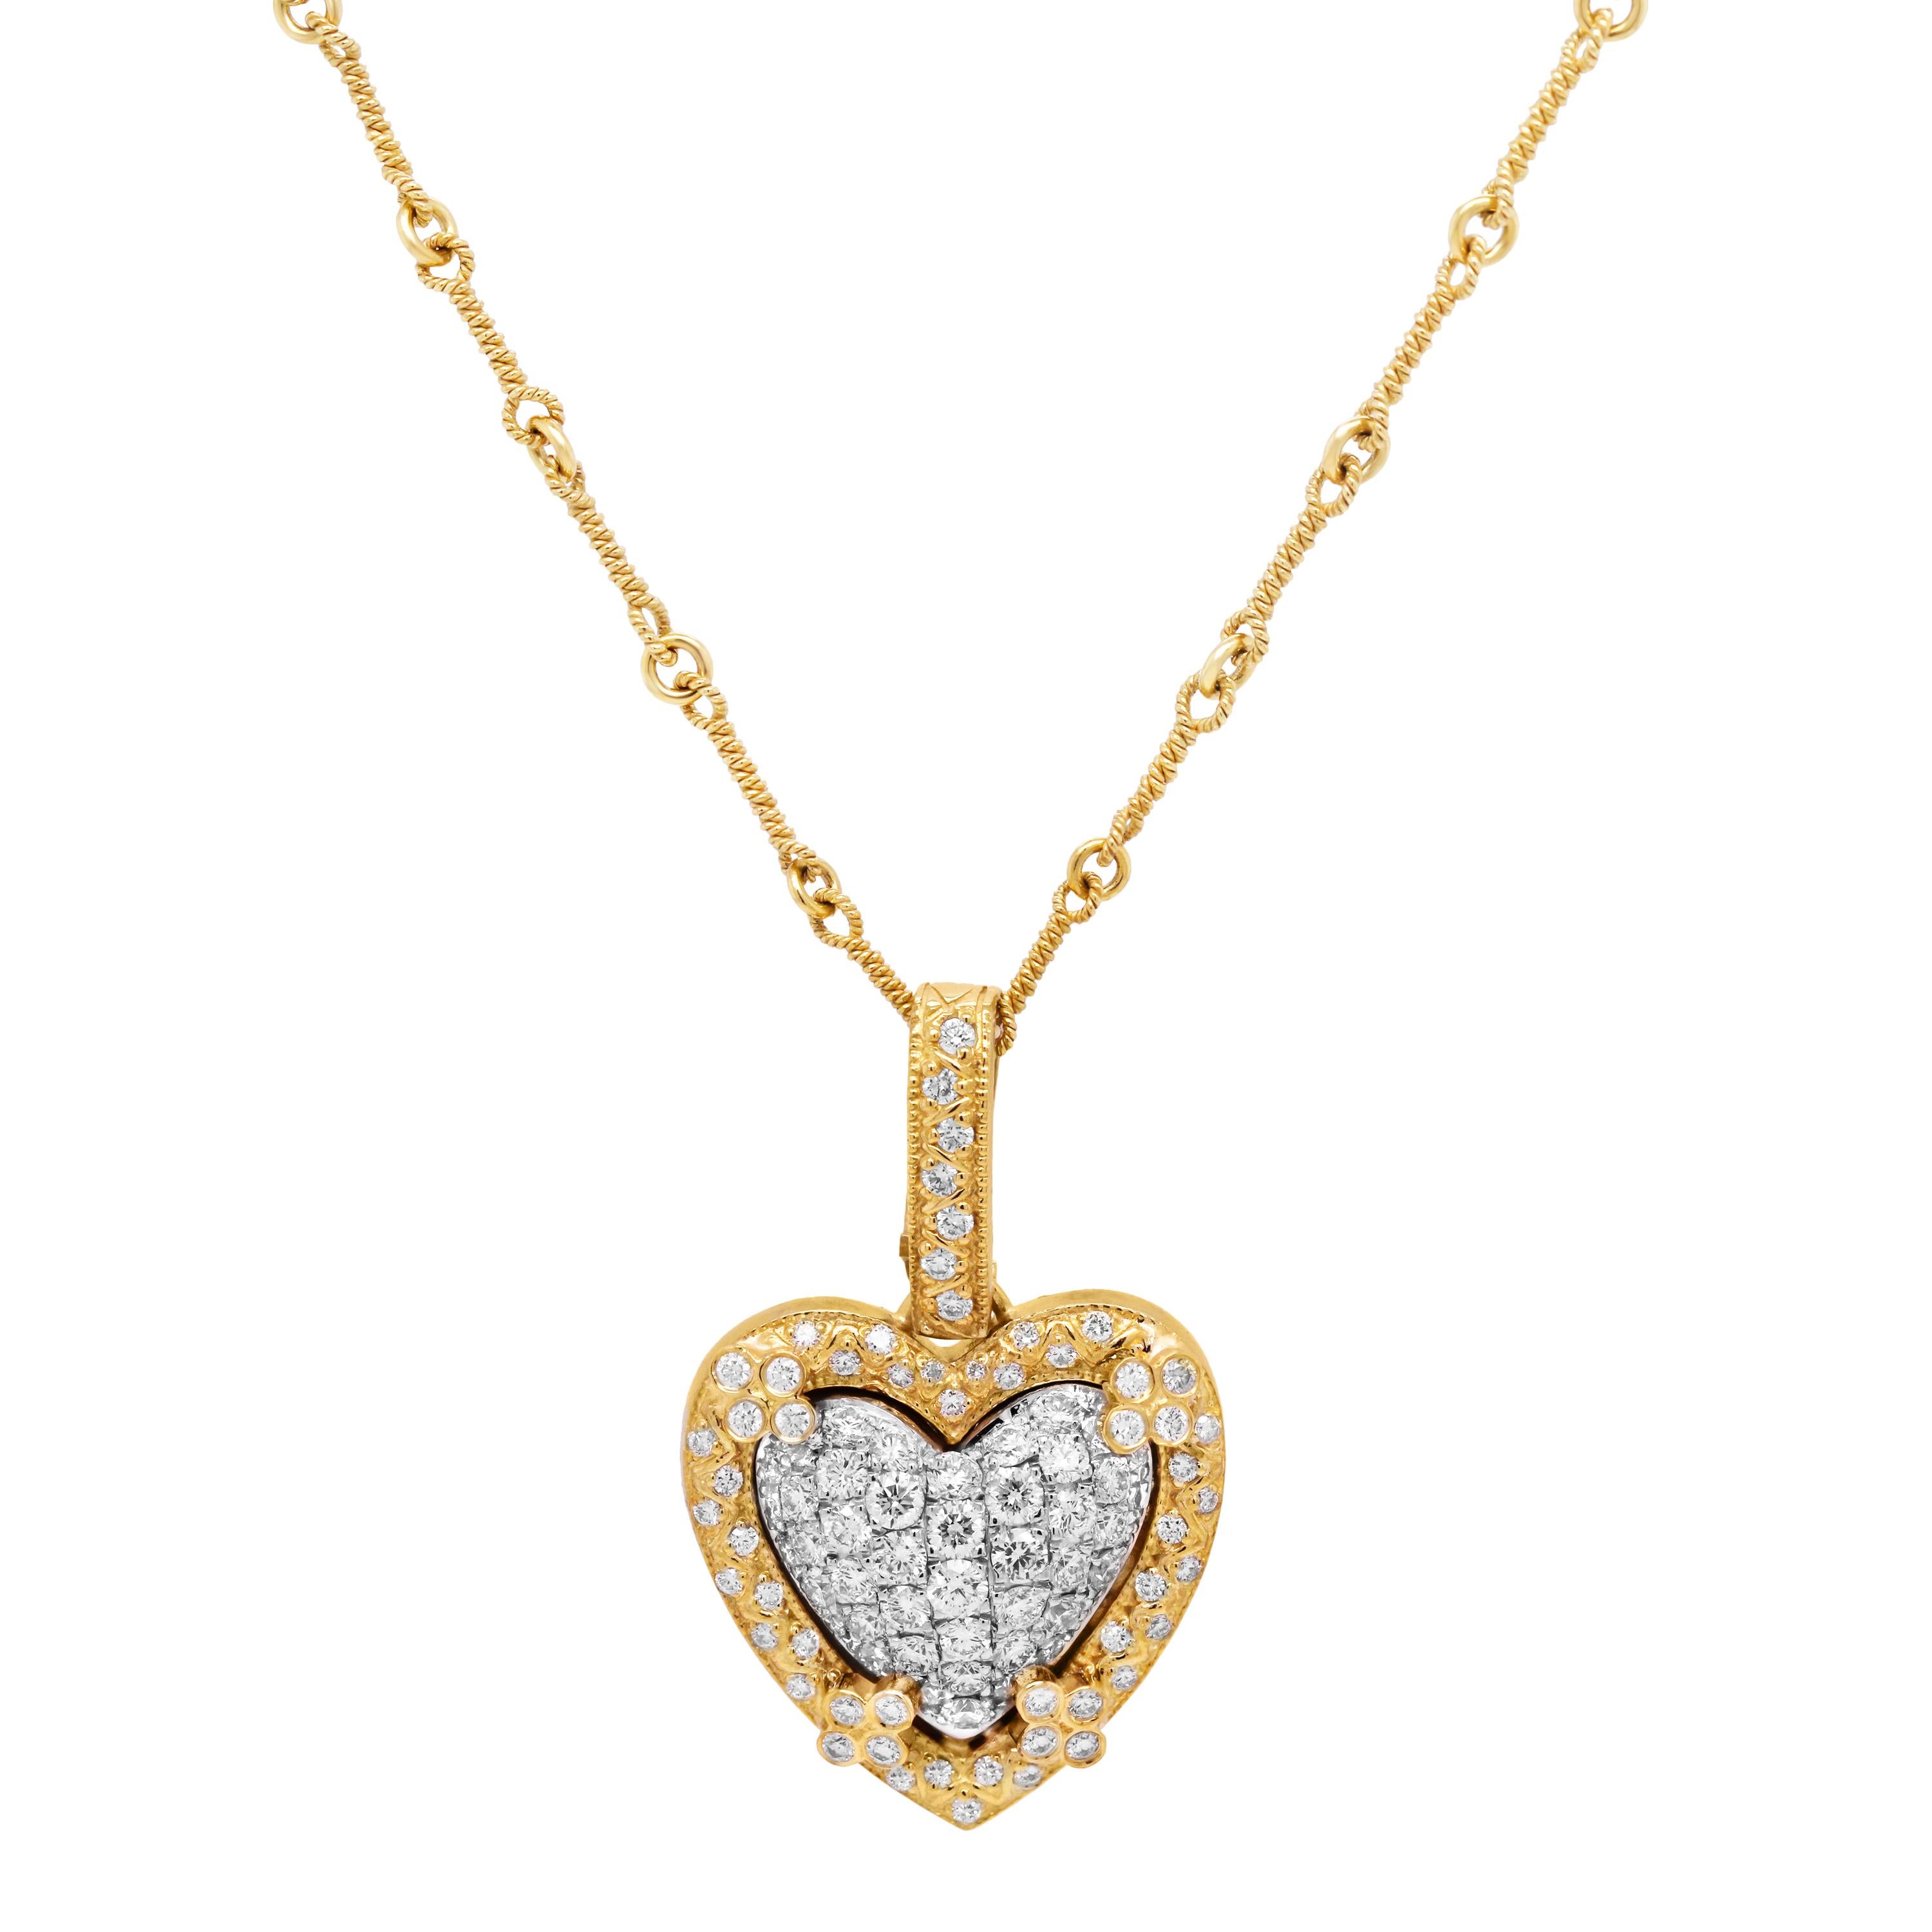 Stambolian 18 Karat Yellow White Gold Diamond Heart Enhancer Pendant Necklace

This beautiful heart pendant features diamonds pavé set in the center with diamonds also all throughout the pendant.

A handmade bone chain is used that is also solid 18k